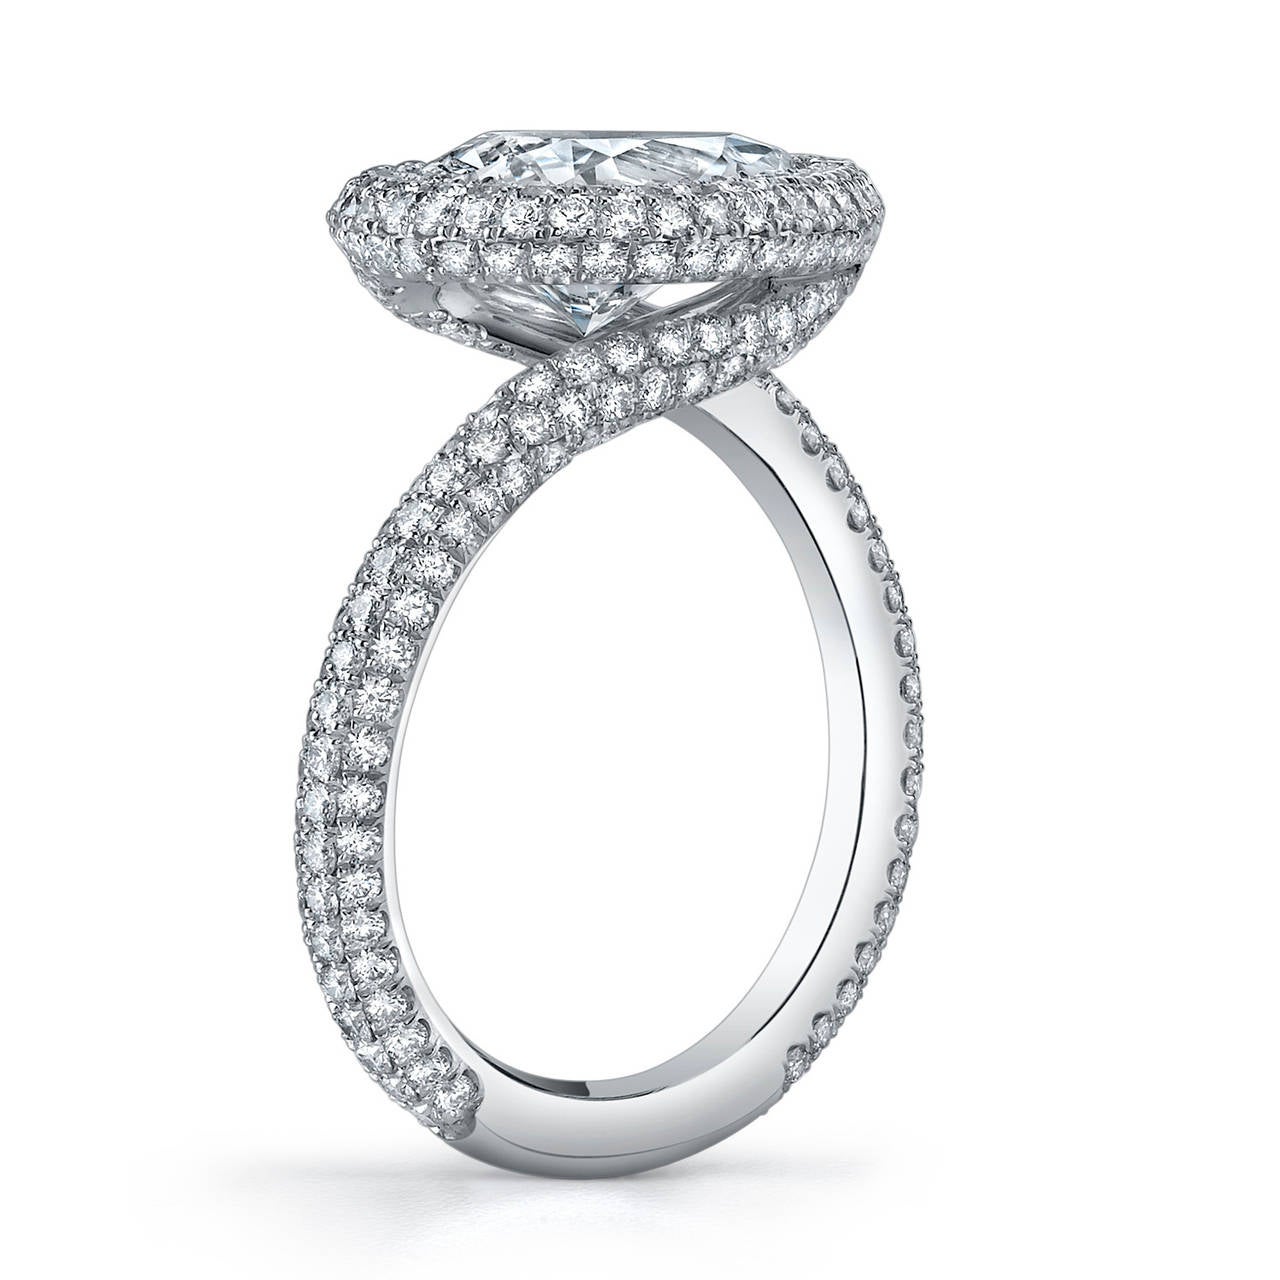 Platinum Diamond Ring with a Pear Shaped Center Stone, accented with Ideal Cut Micro Pave Diamonds.

The sheer elegance and gorgeous curves of this pear shaped mounting are perfect for a unique woman who appreciates sensual design. Women who